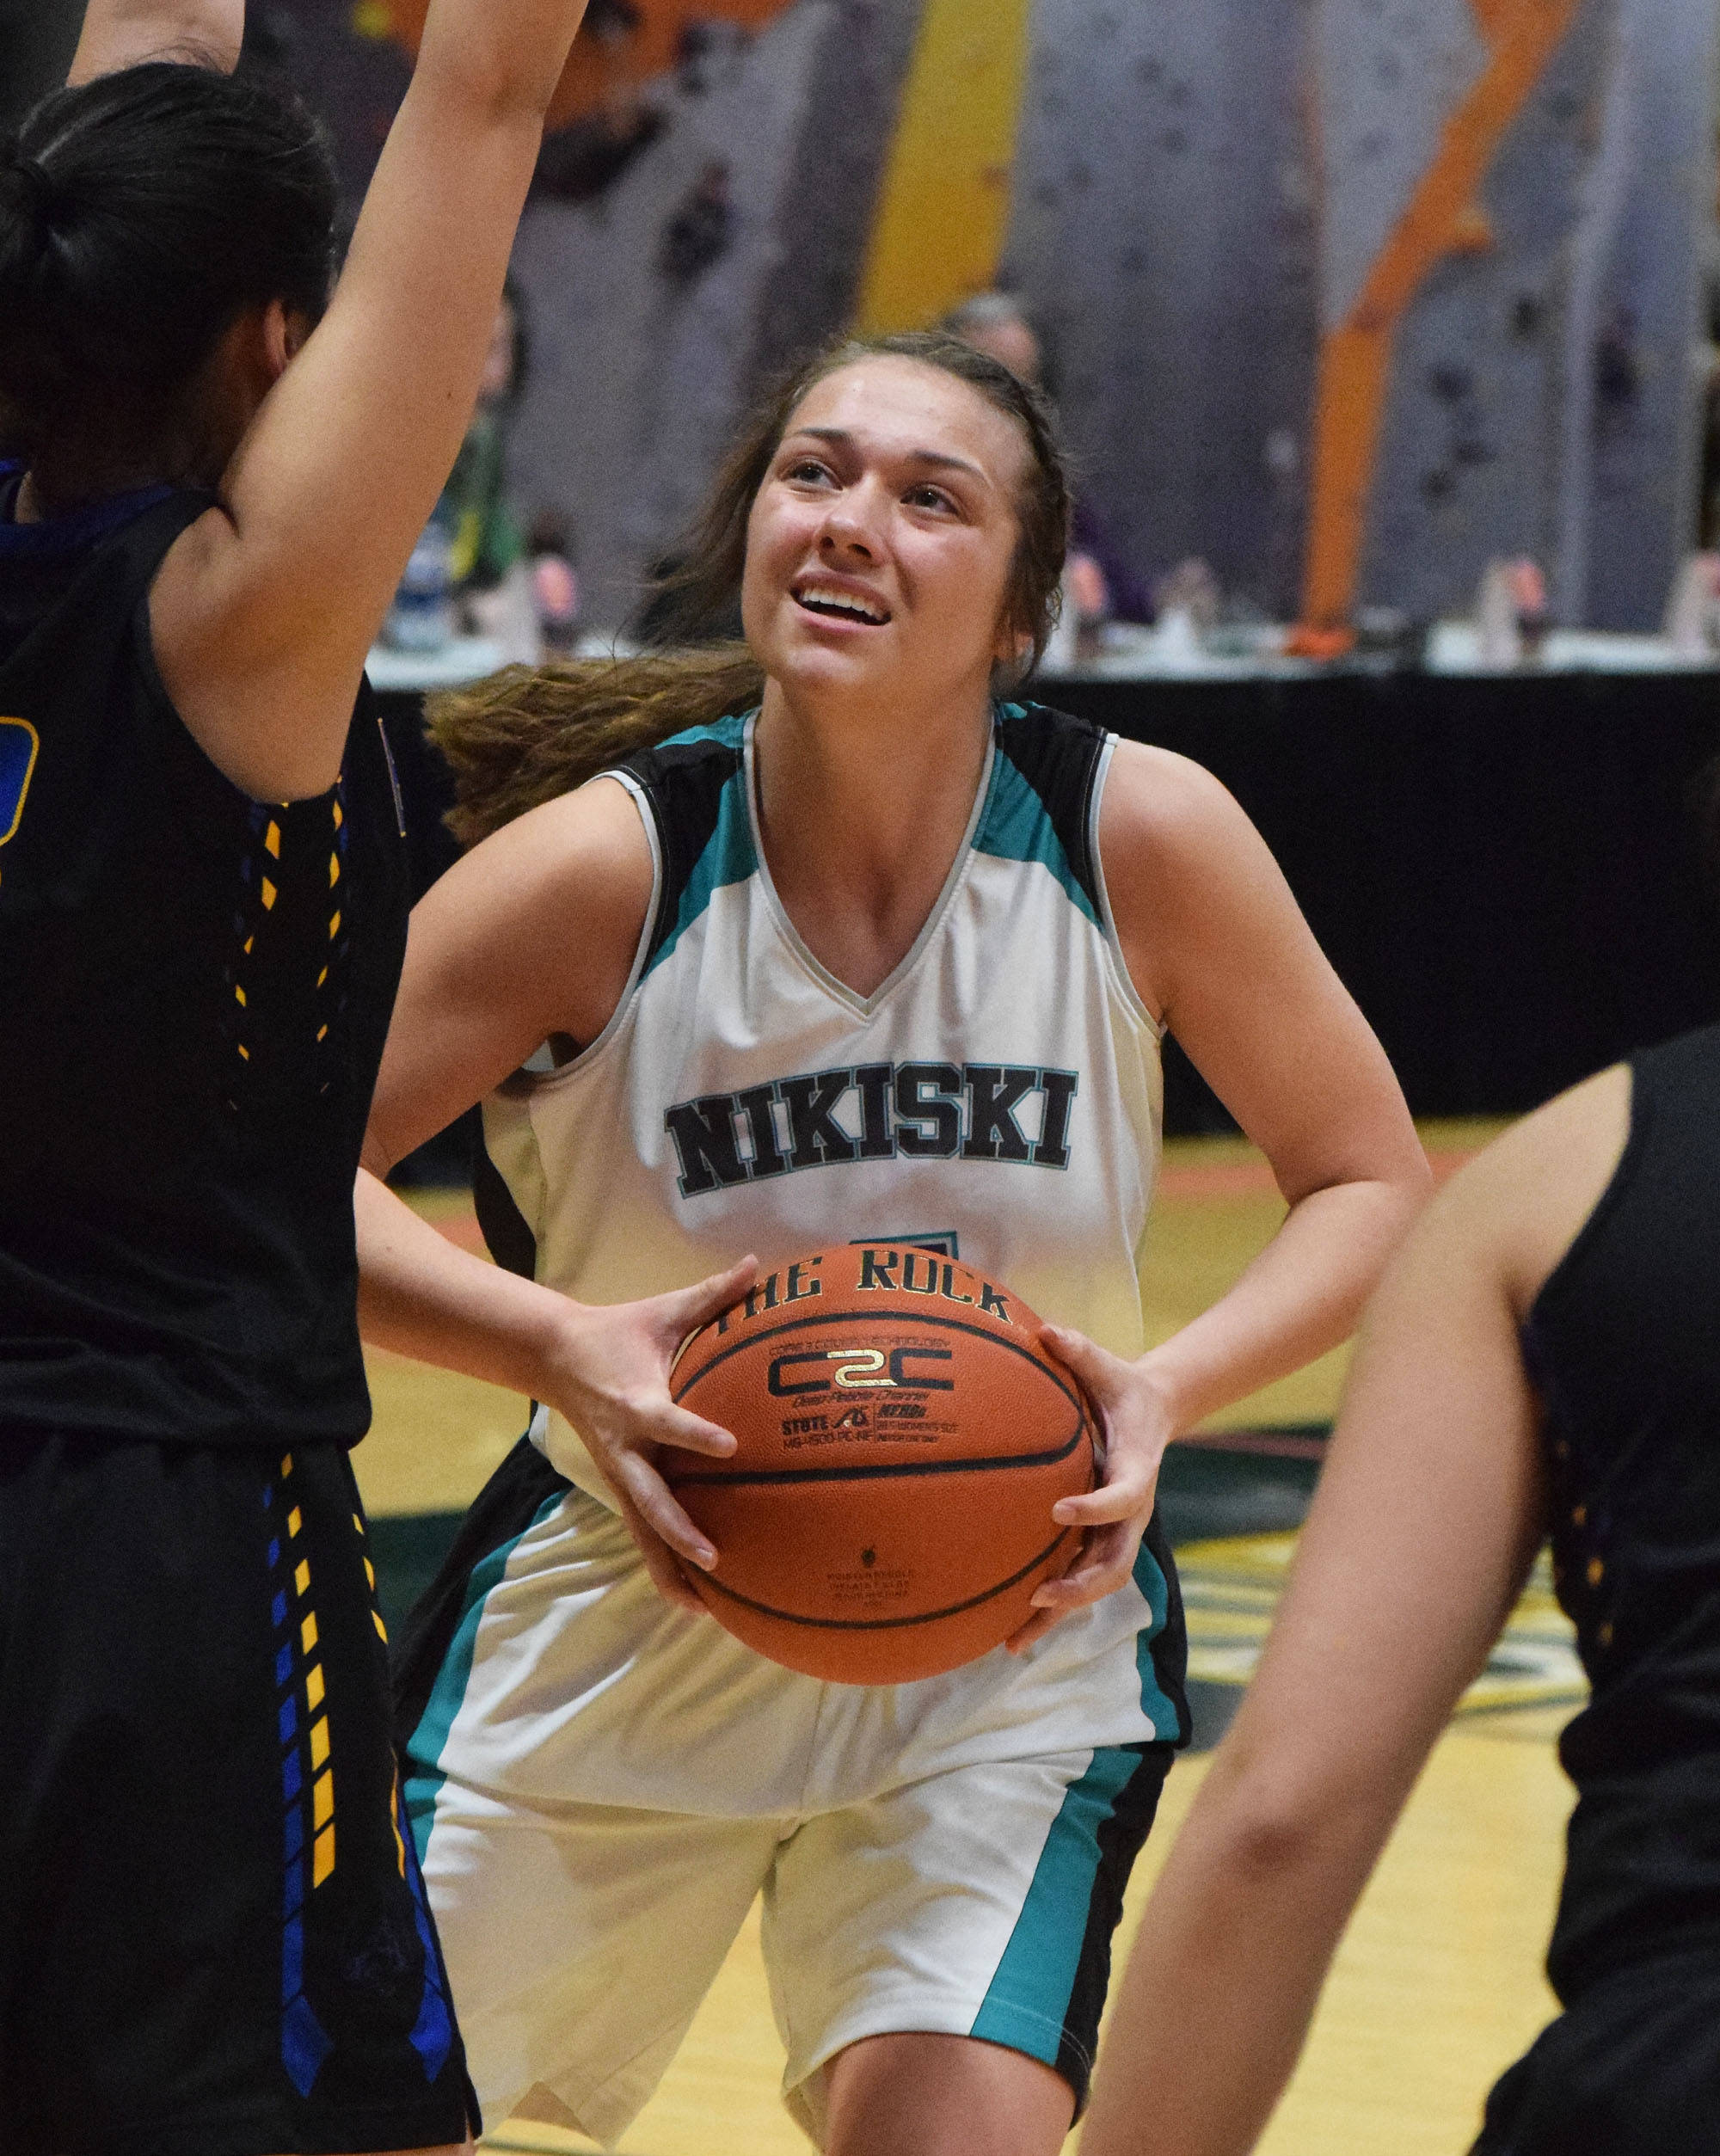 Nikiski’s Emma Wik looks for the open shot Friday, March 22, 2019, against Barrow at the Class 3A girls state tournament at the Alaska Airlines Center in Anchorage. (Photo by Joey Klecka/Peninsula Clarion)